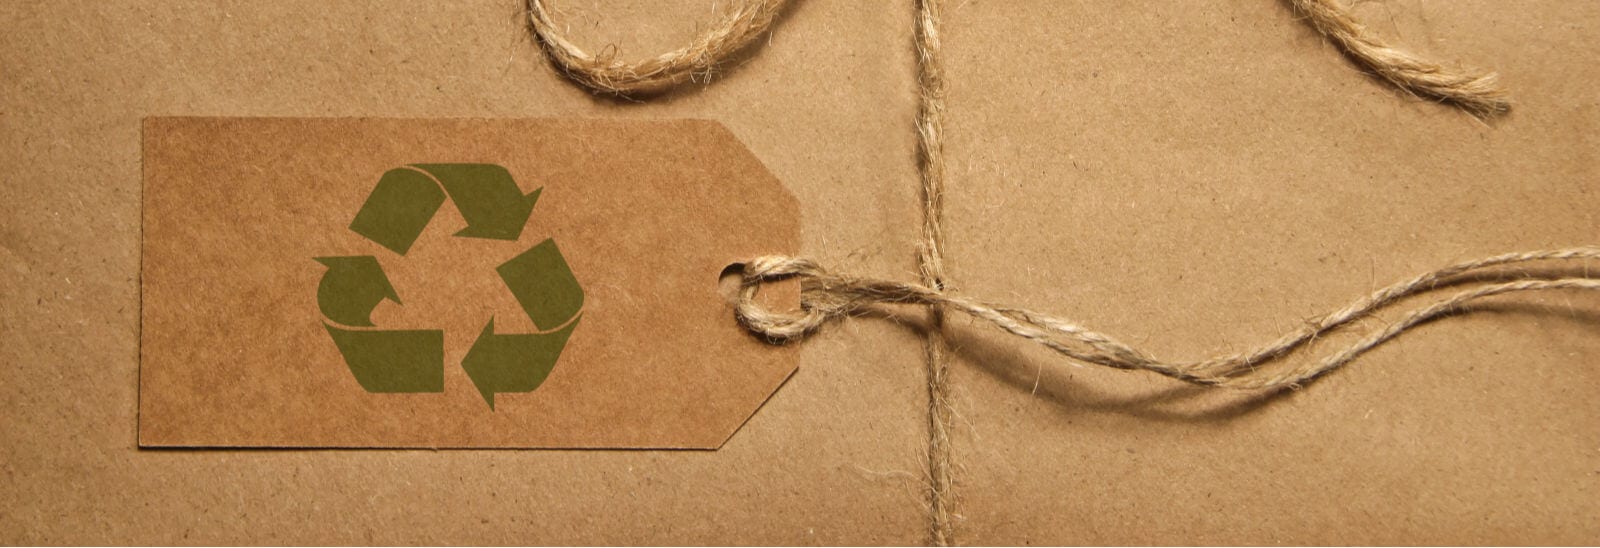 How Important Are Eco Friendly Packaging Options to Today’s Businesses?